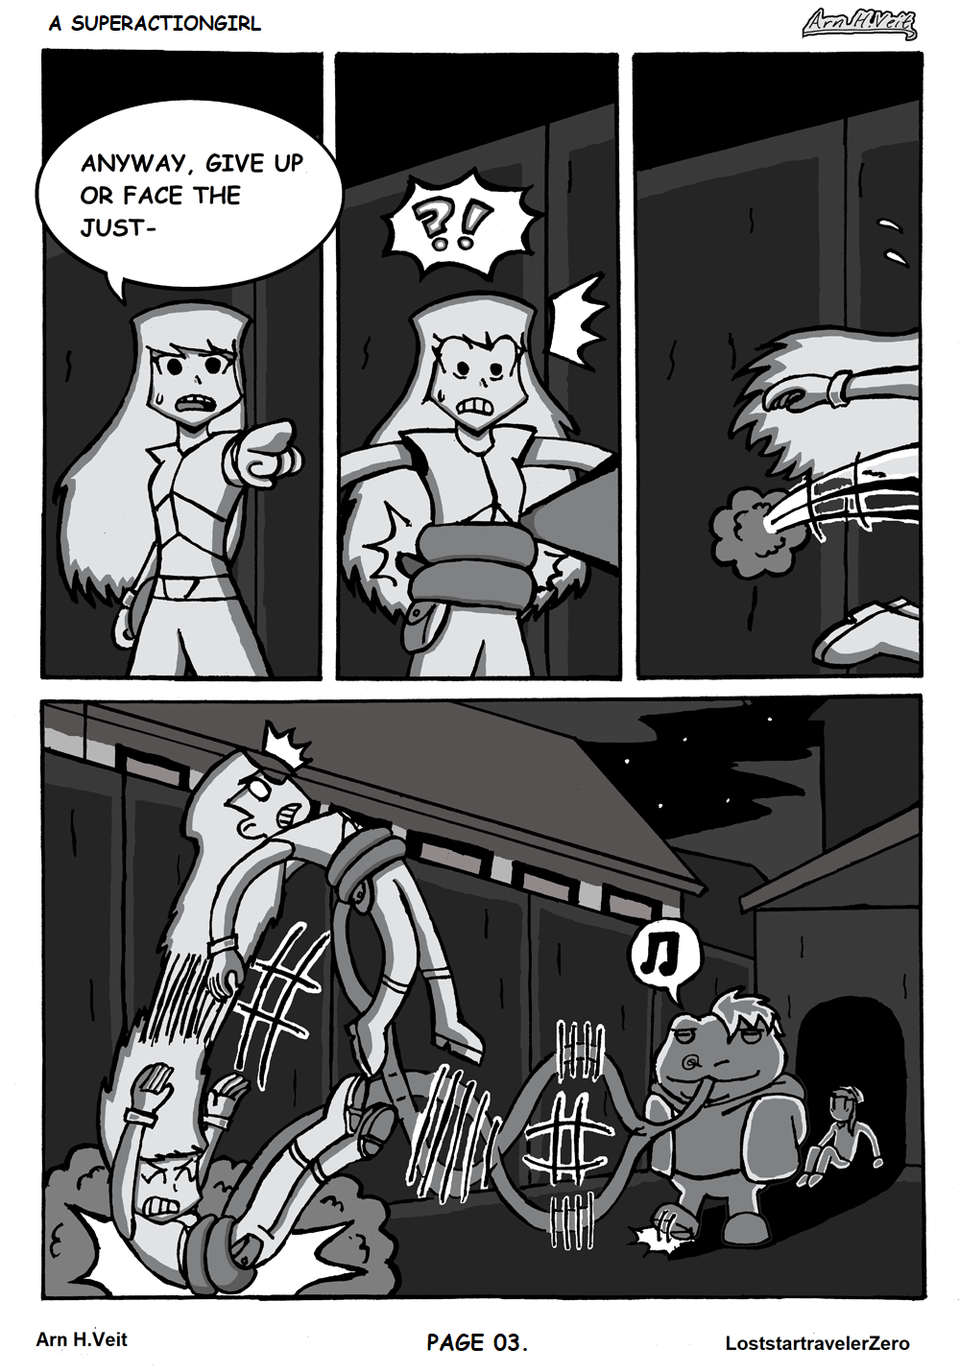 A SuperActionGirl Chapter 01. Page 03. SuperActionGirl vs Monster-Frog.